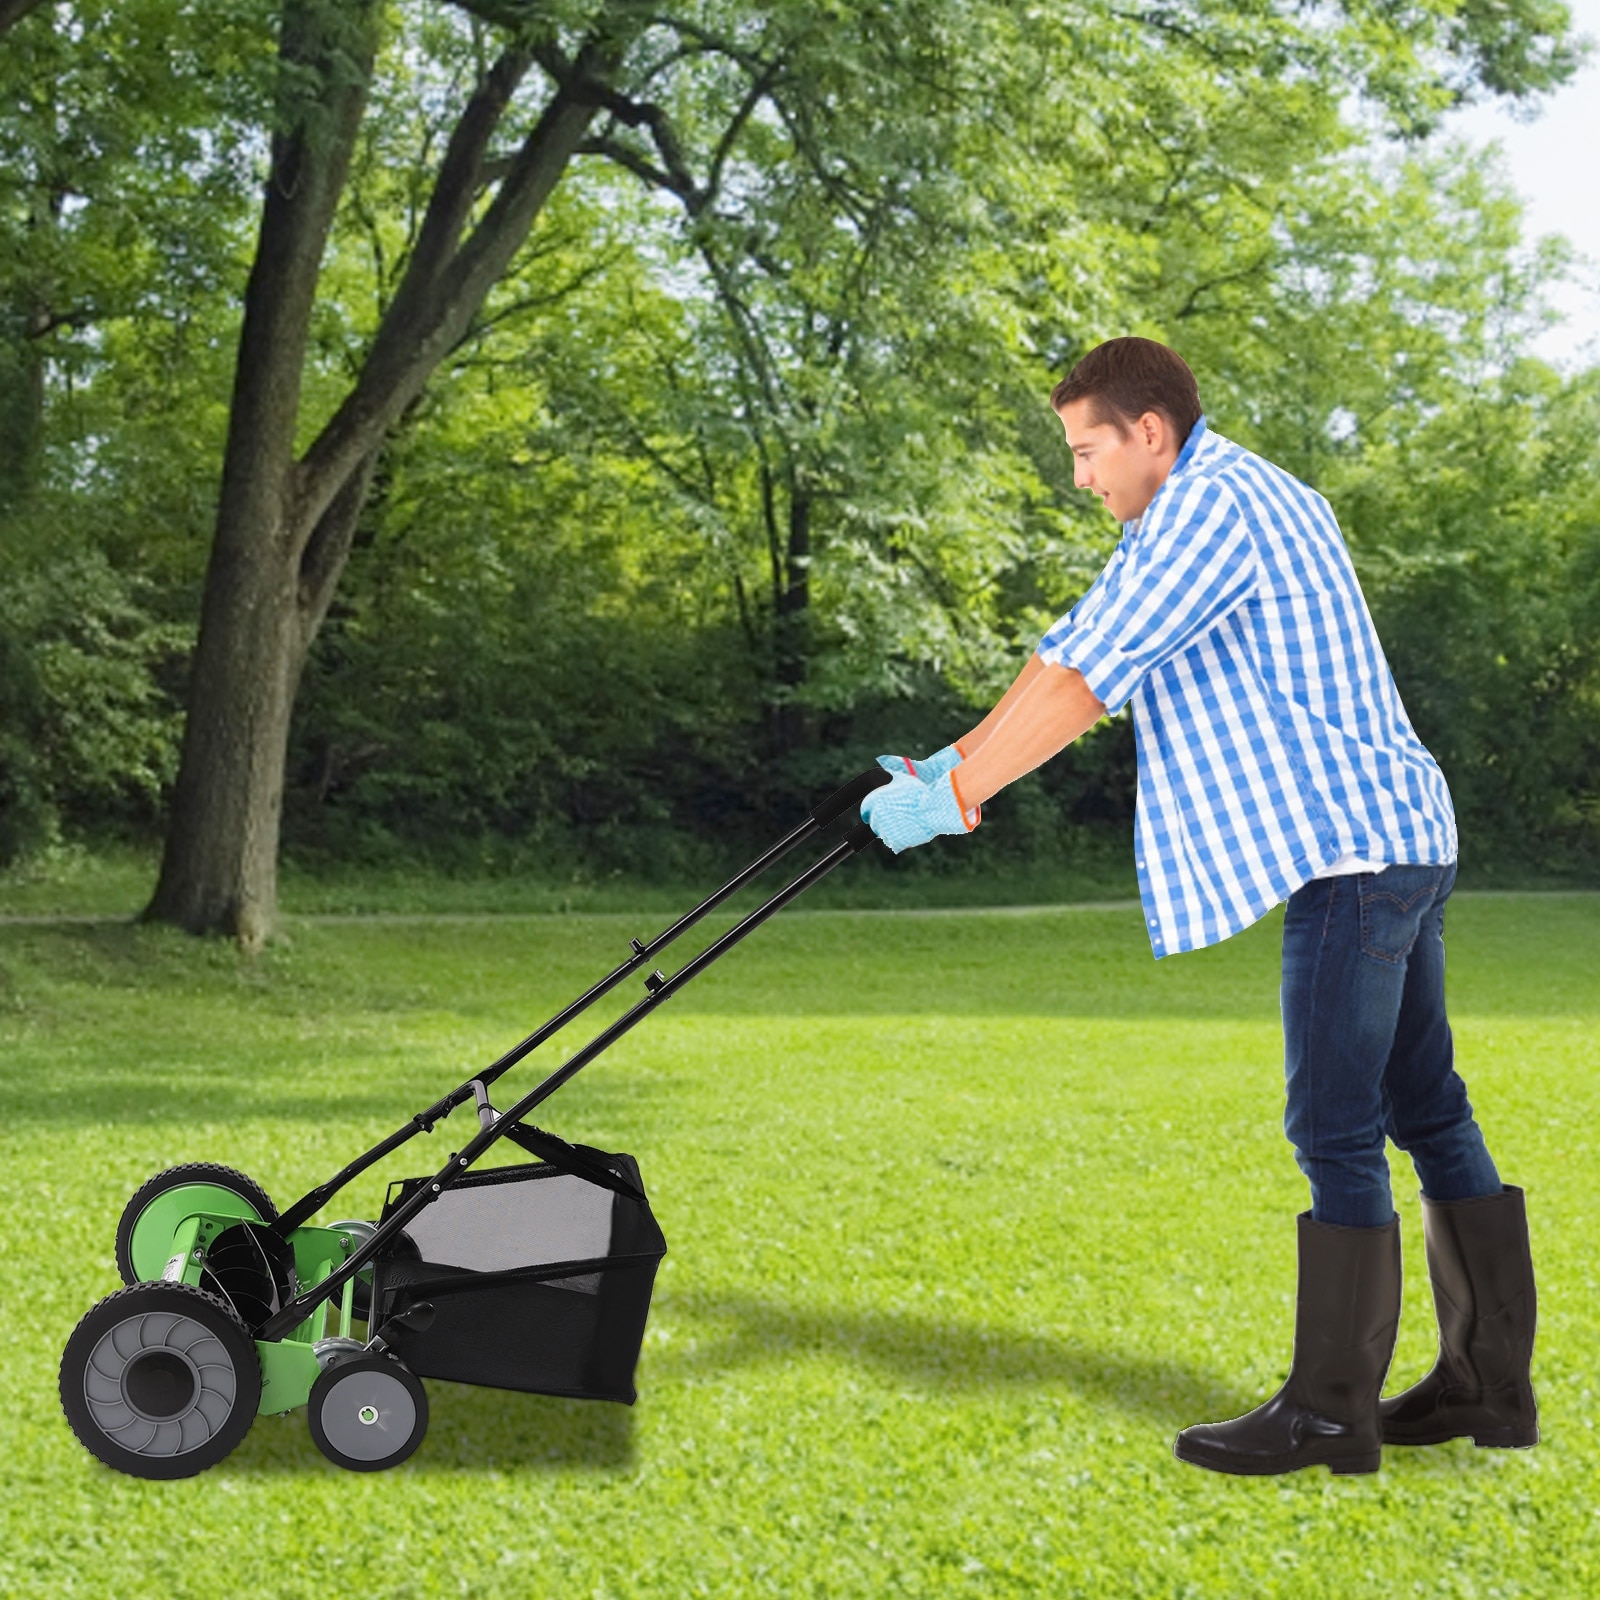 https://ak1.ostkcdn.com/images/products/is/images/direct/b103dfc1968973e1e55a9047977614b4bf7712e4/Cylinder-Lawnmower-Push-Reel-Lawn-Mower-with-Grass-Catcher.jpg